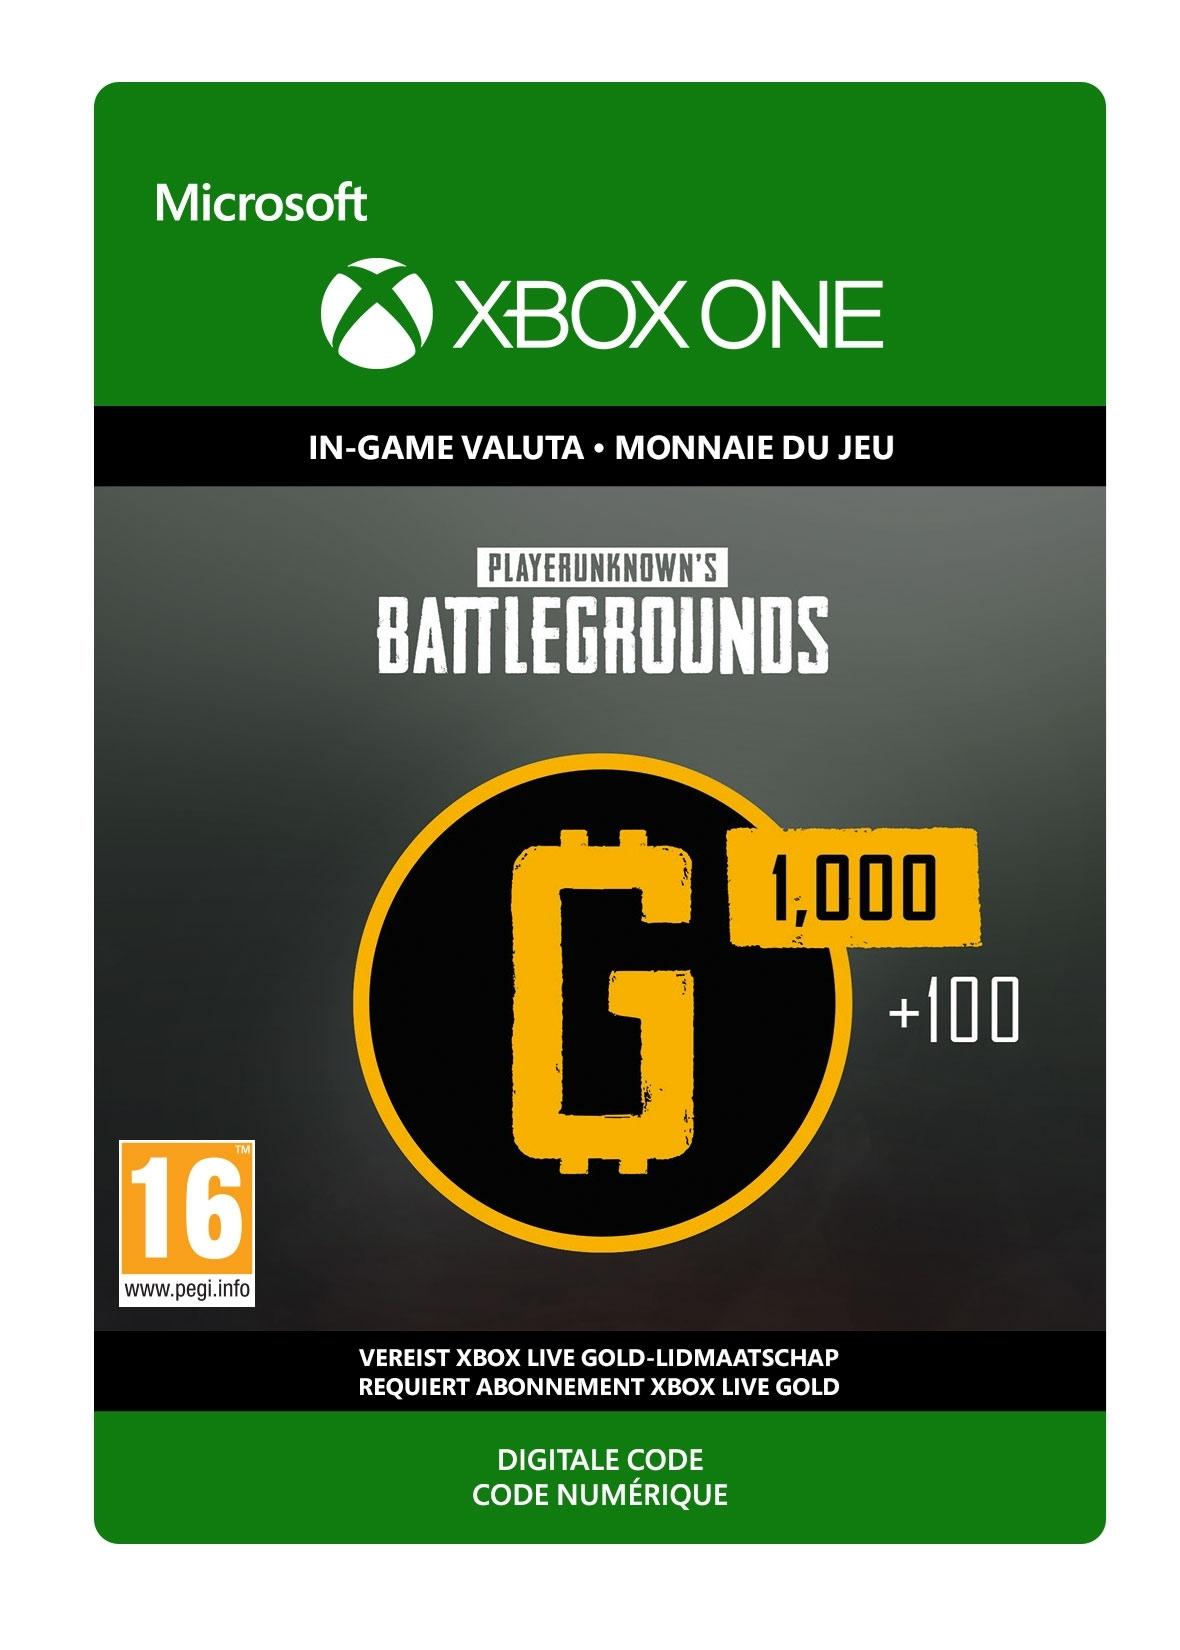 Playerunknown's battlegrounds 1,100 G-Coin - Xbox One - Consumable | 7LM-00022 (c7794e9c-412d-4642-8aed-53ac39f2e037)